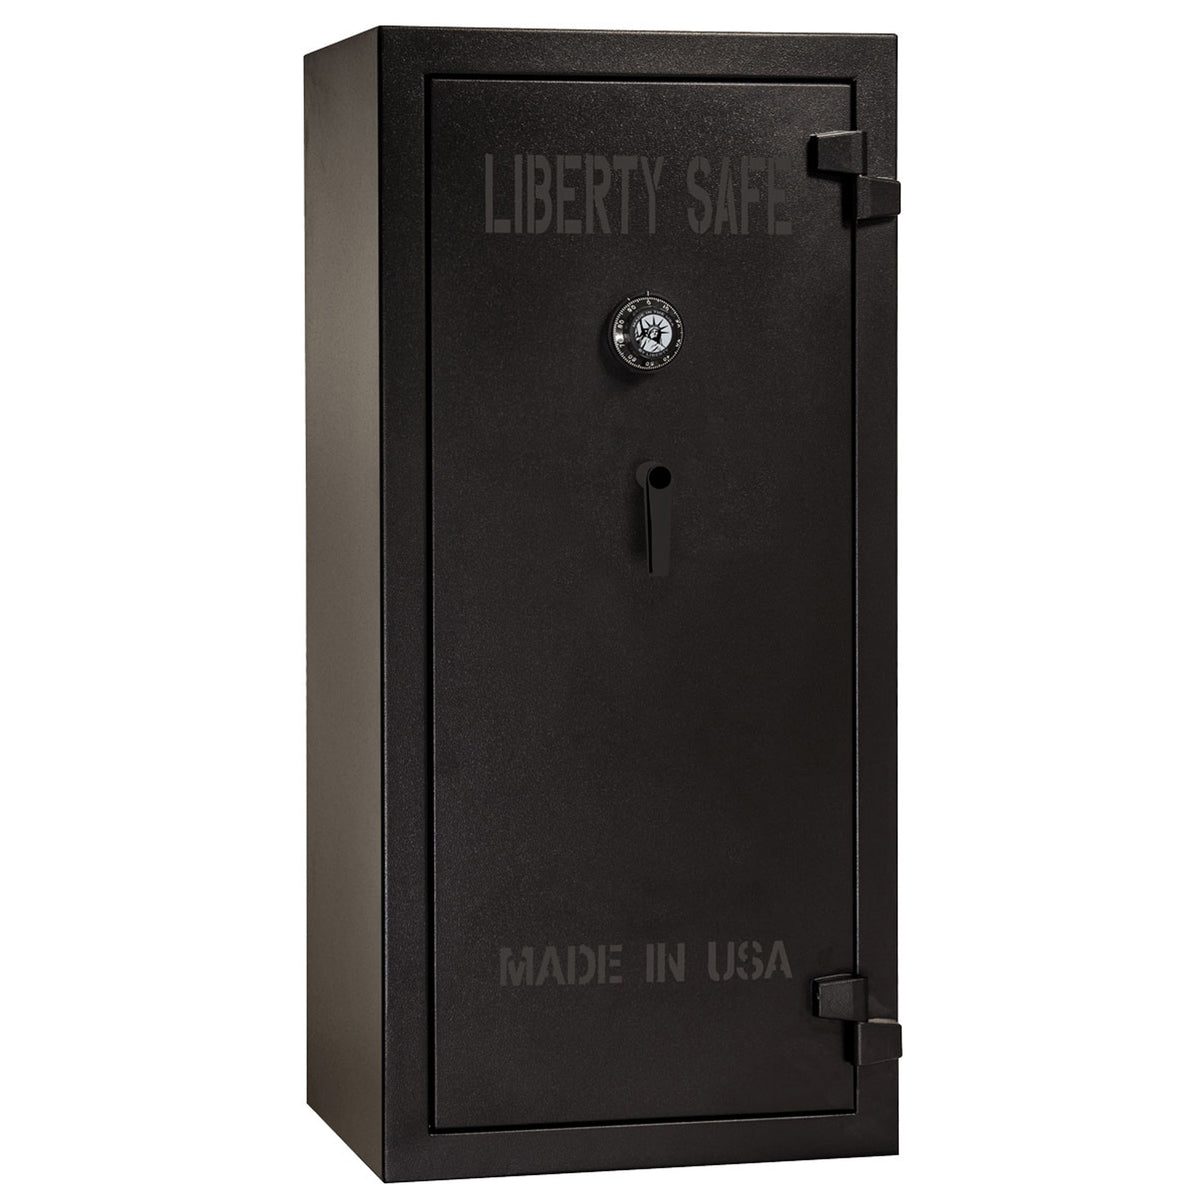 Liberty Safe TACTICAL 24 in Textured Black with Black Chrome Mechanical Lock.